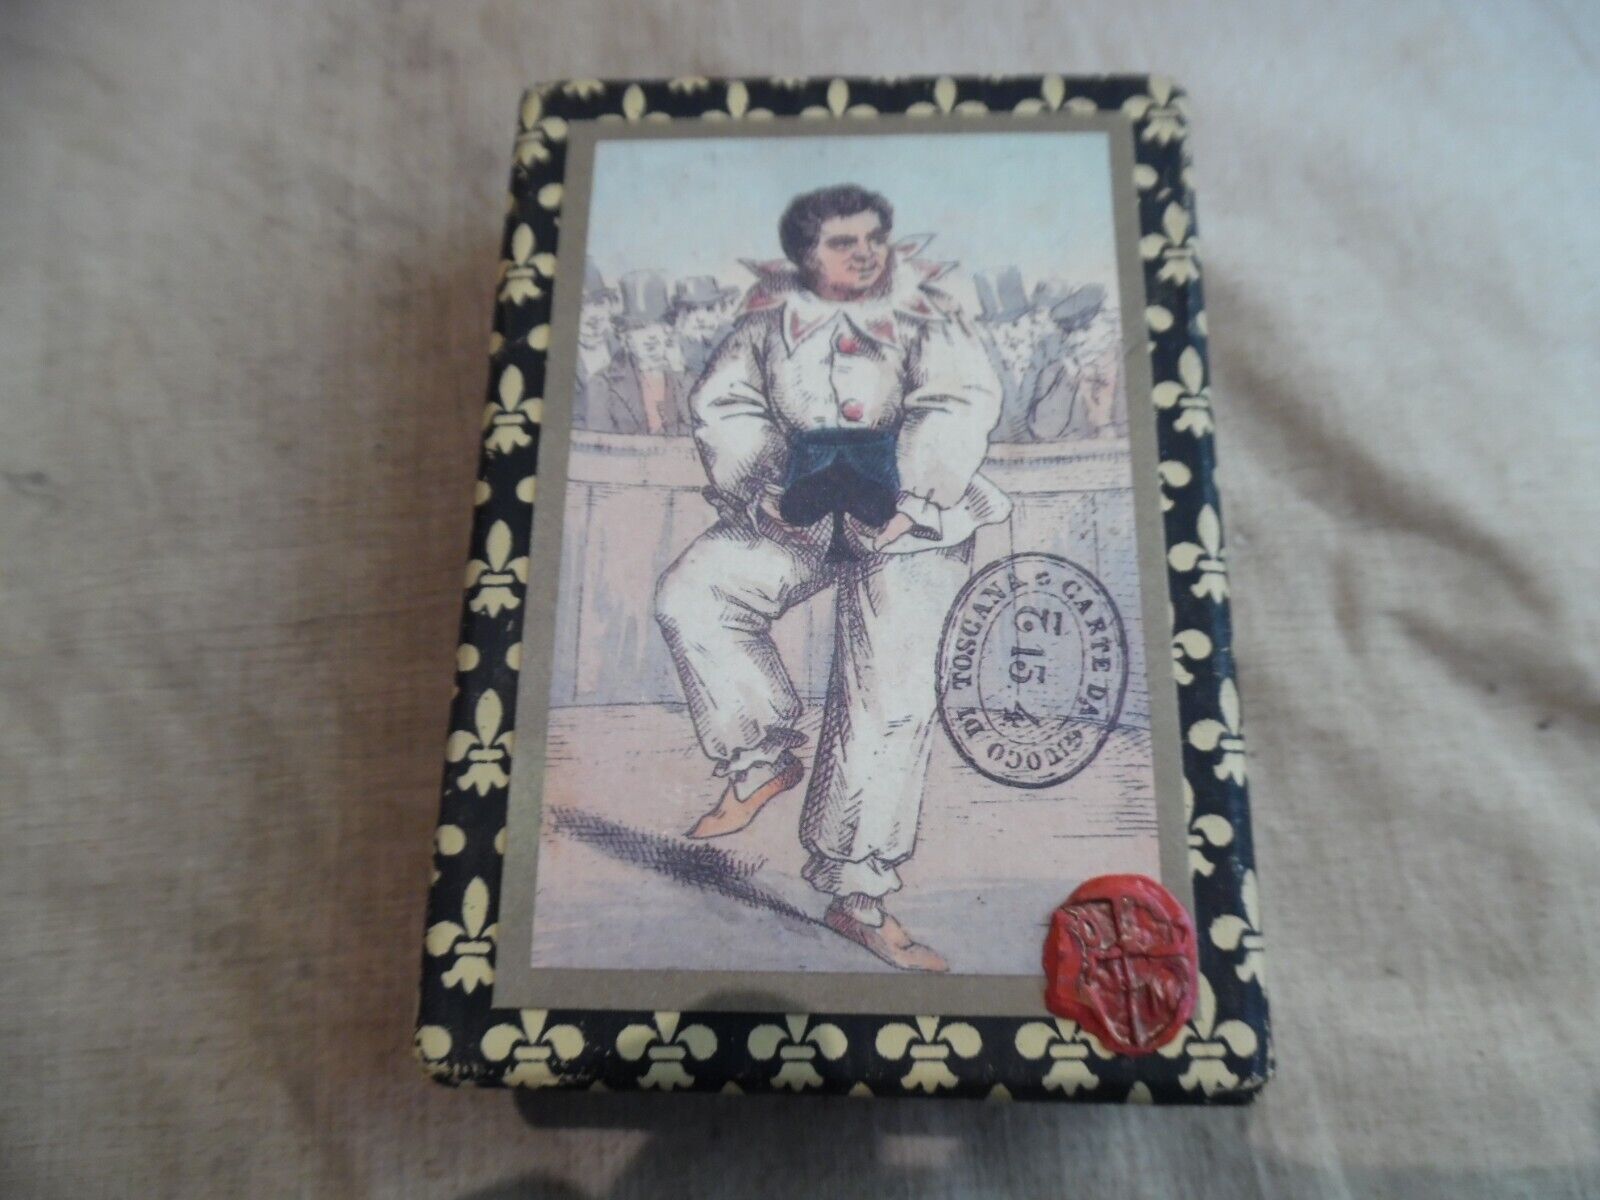 Vintage Toscana Playing Deck of Cards Made In Italy For Cavallini & Co 1996